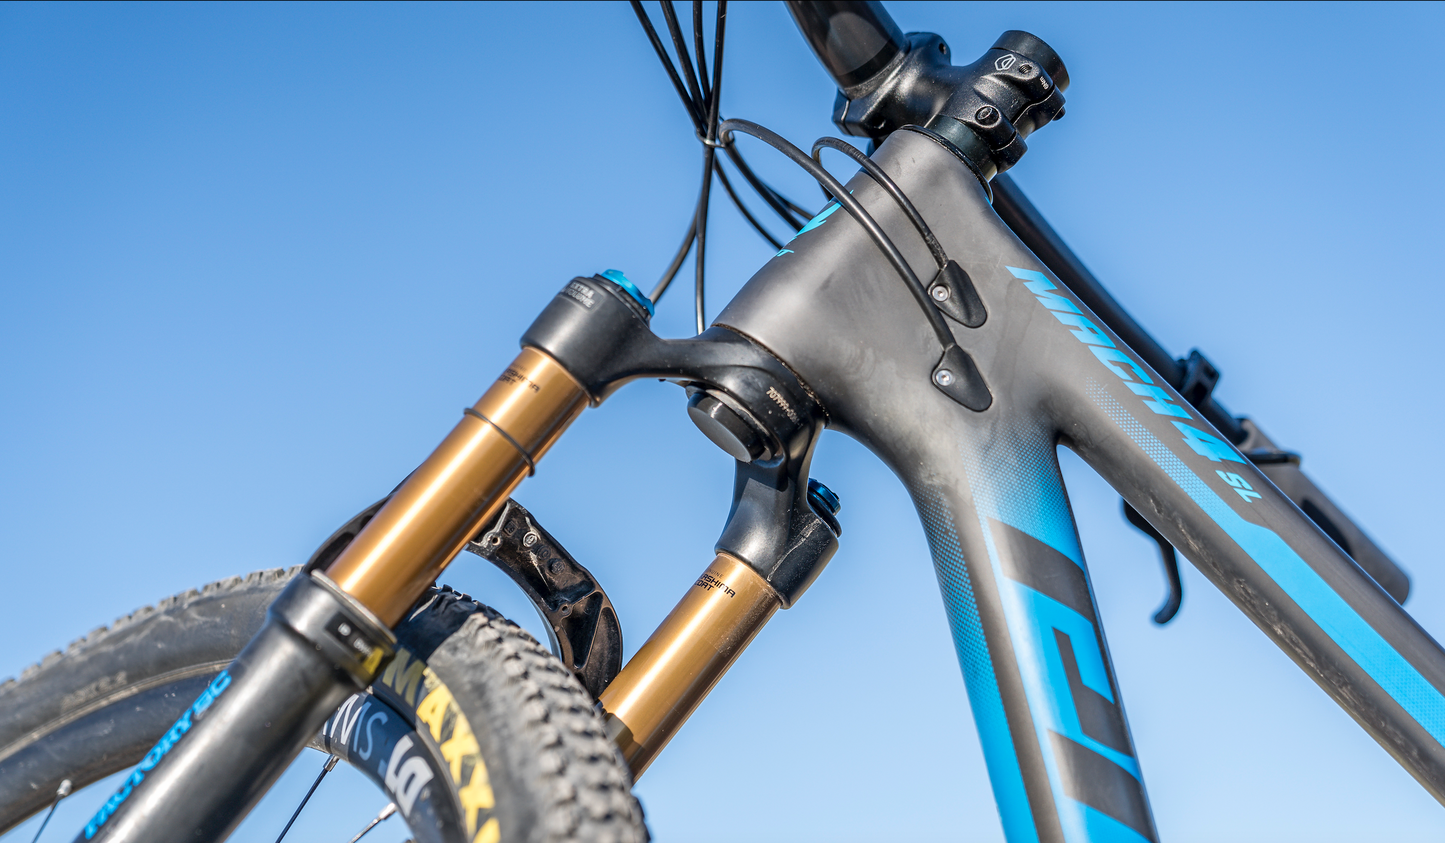 Stealth Tag Fork- designed to hide your Airtag in the steer tube of mountain bike forks in a discreet location for theft recovery